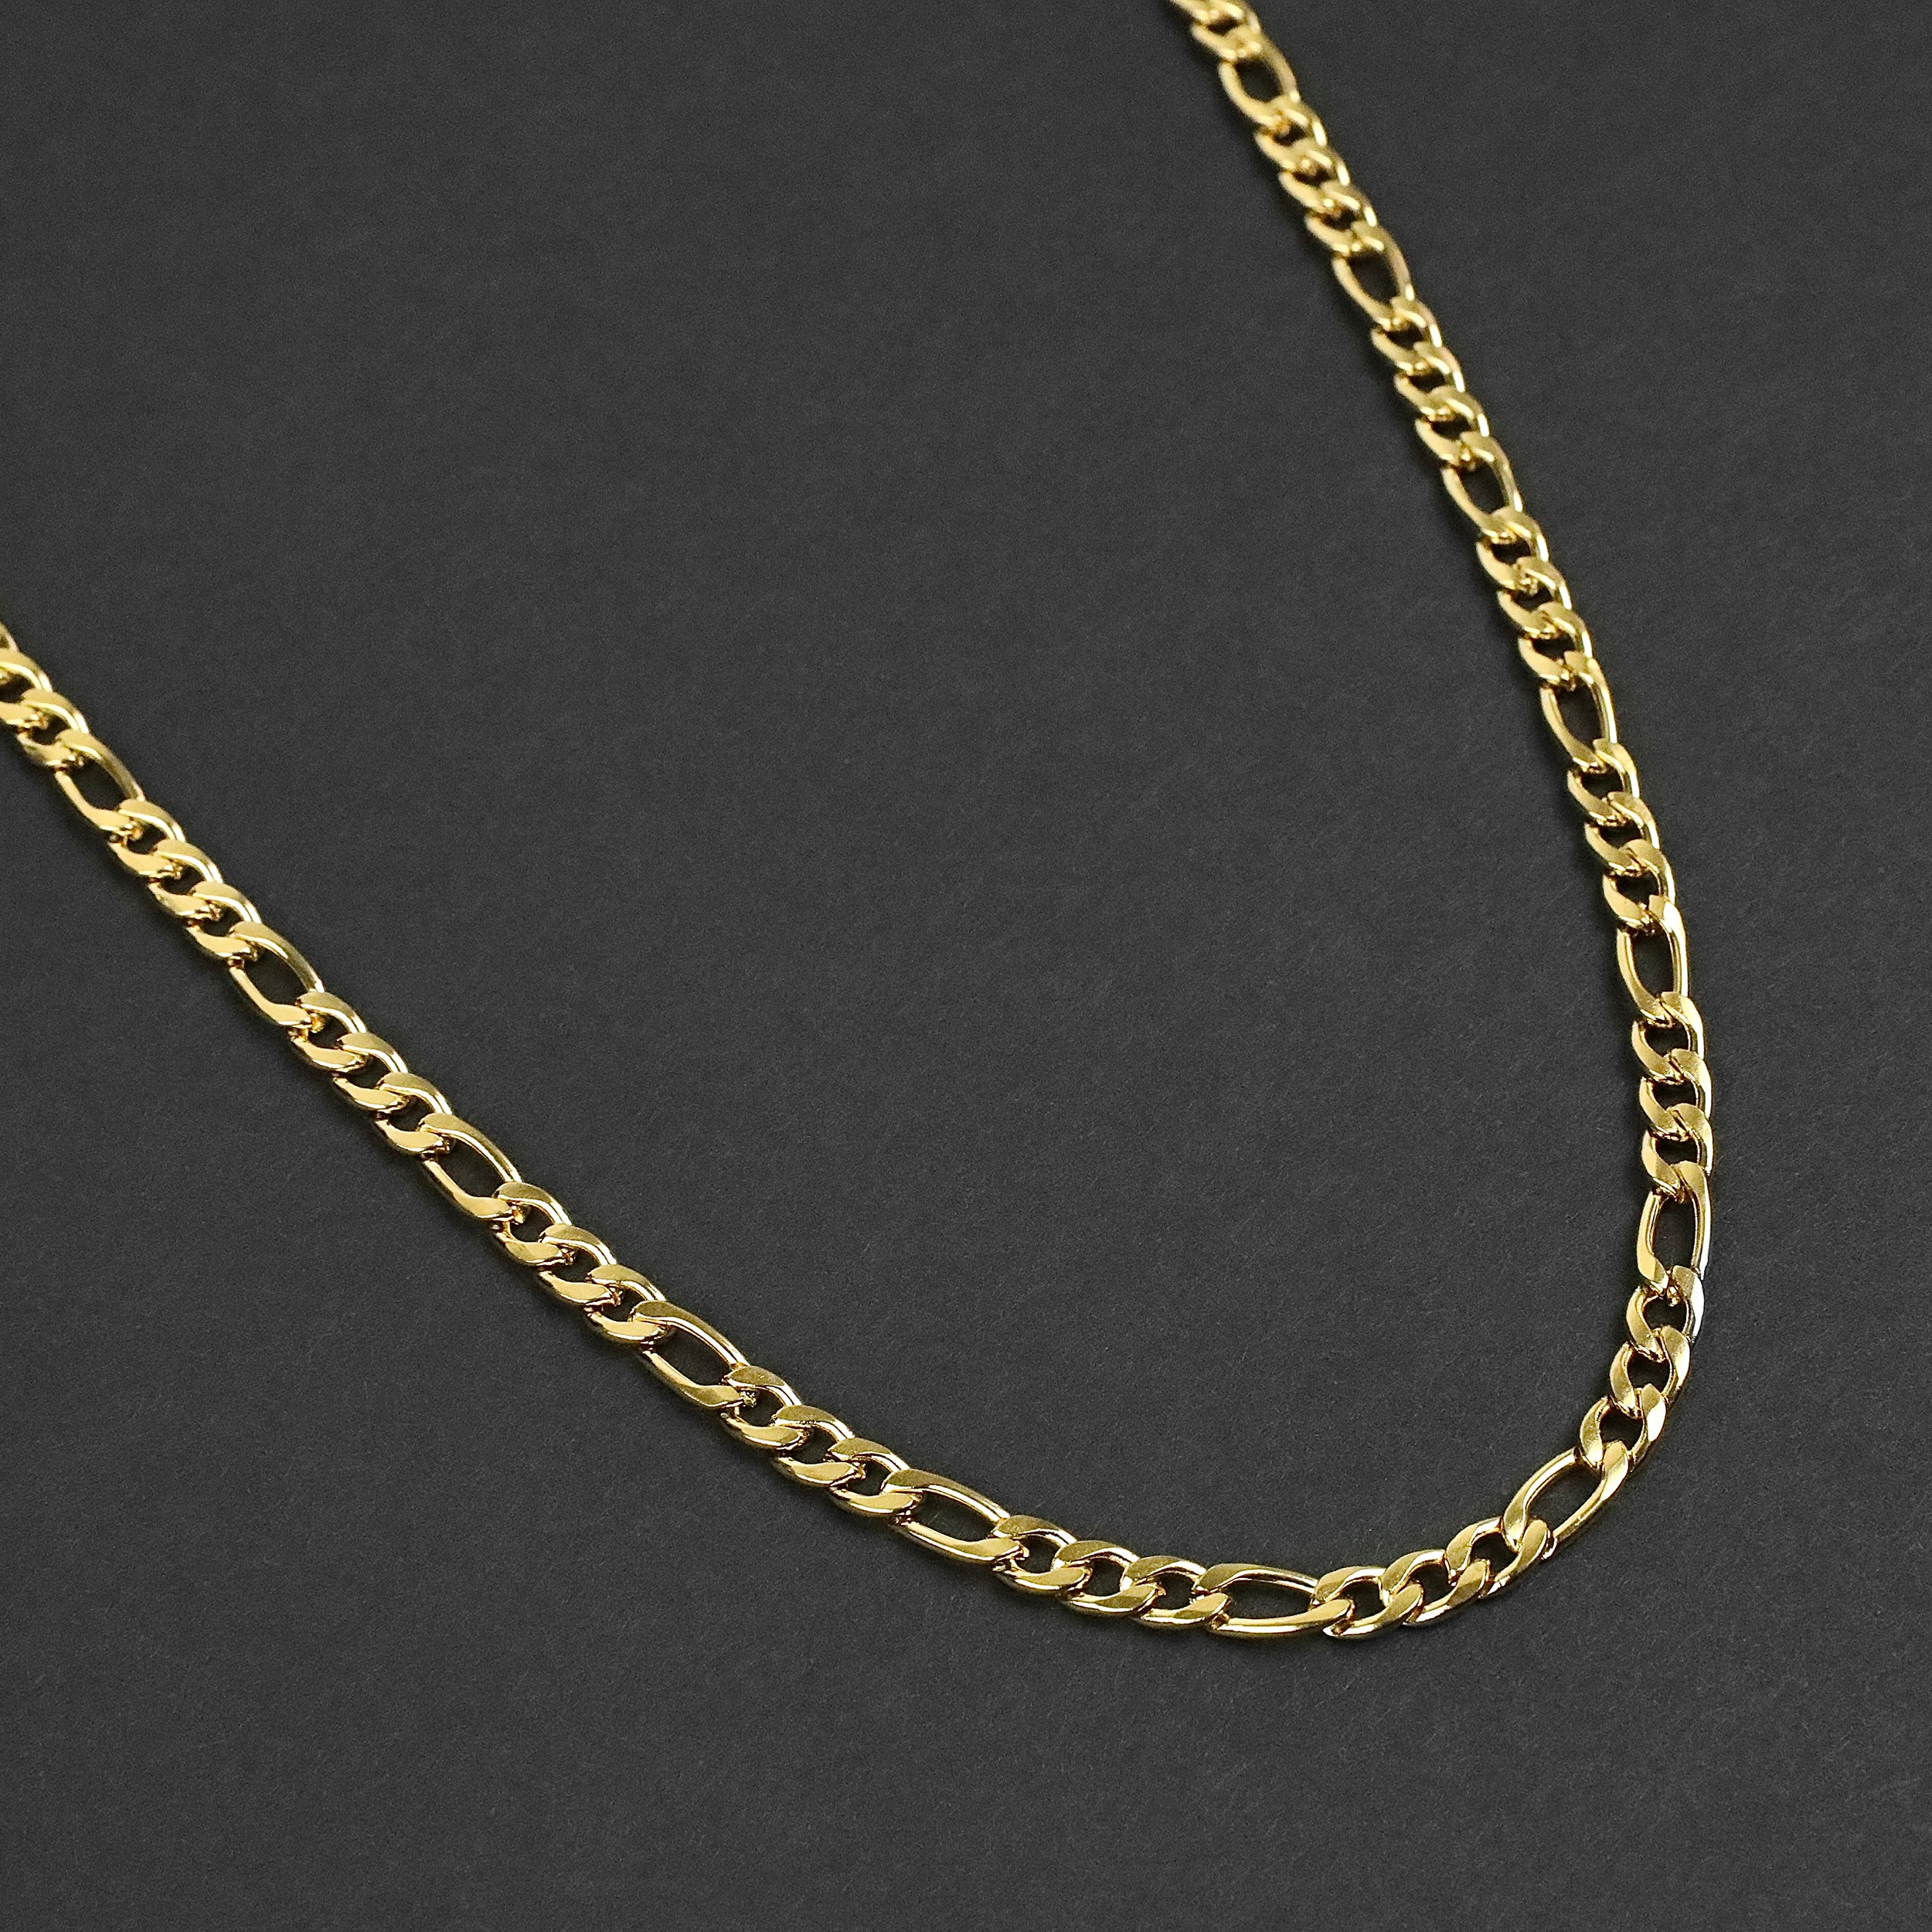 Figaro Chain Necklace - Gold 4.5mm